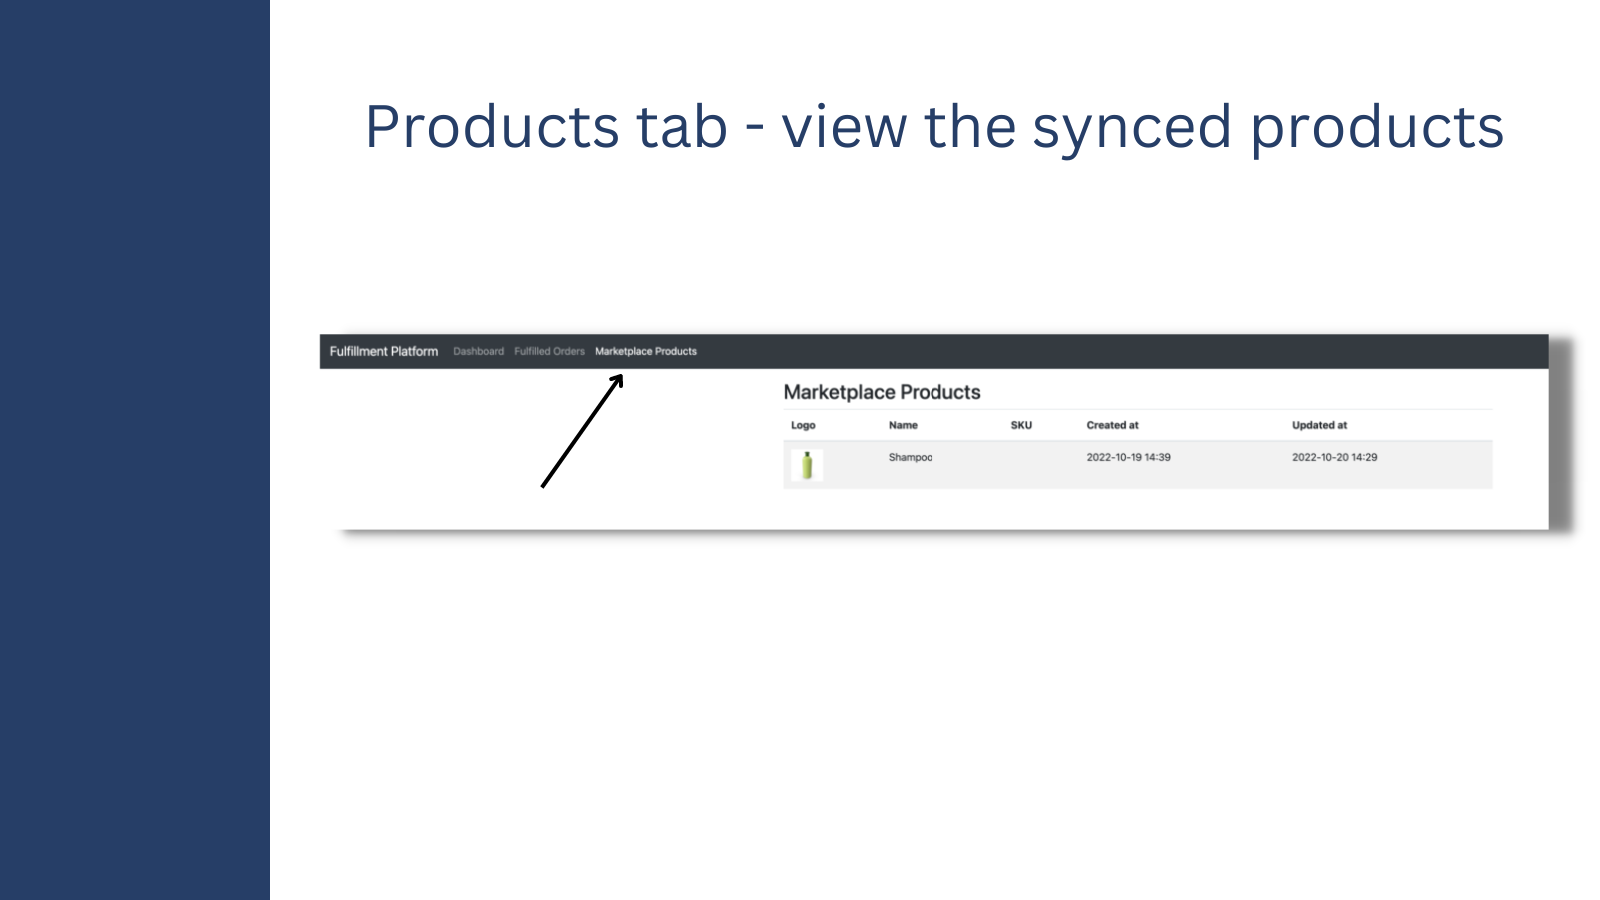 Products tab - view the products you have synced